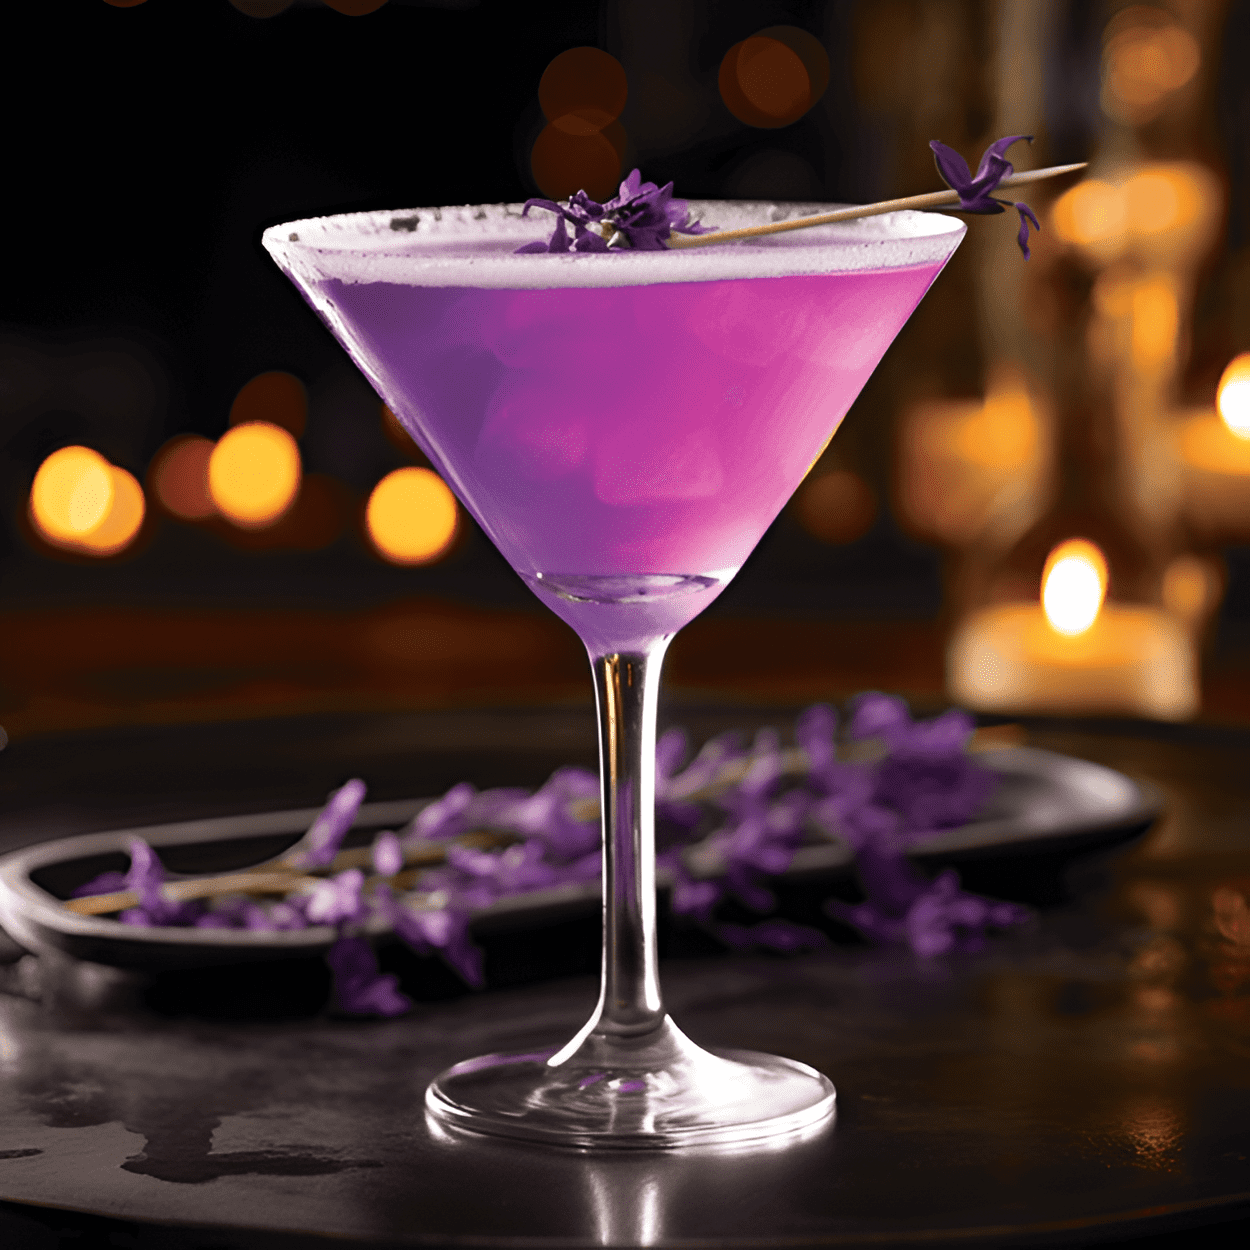 Ube-tini Cocktail Recipe - The Ube-tini is a sweet, creamy cocktail with a hint of earthiness from the Ube. It has a velvety texture and a unique purple hue that adds to its appeal.